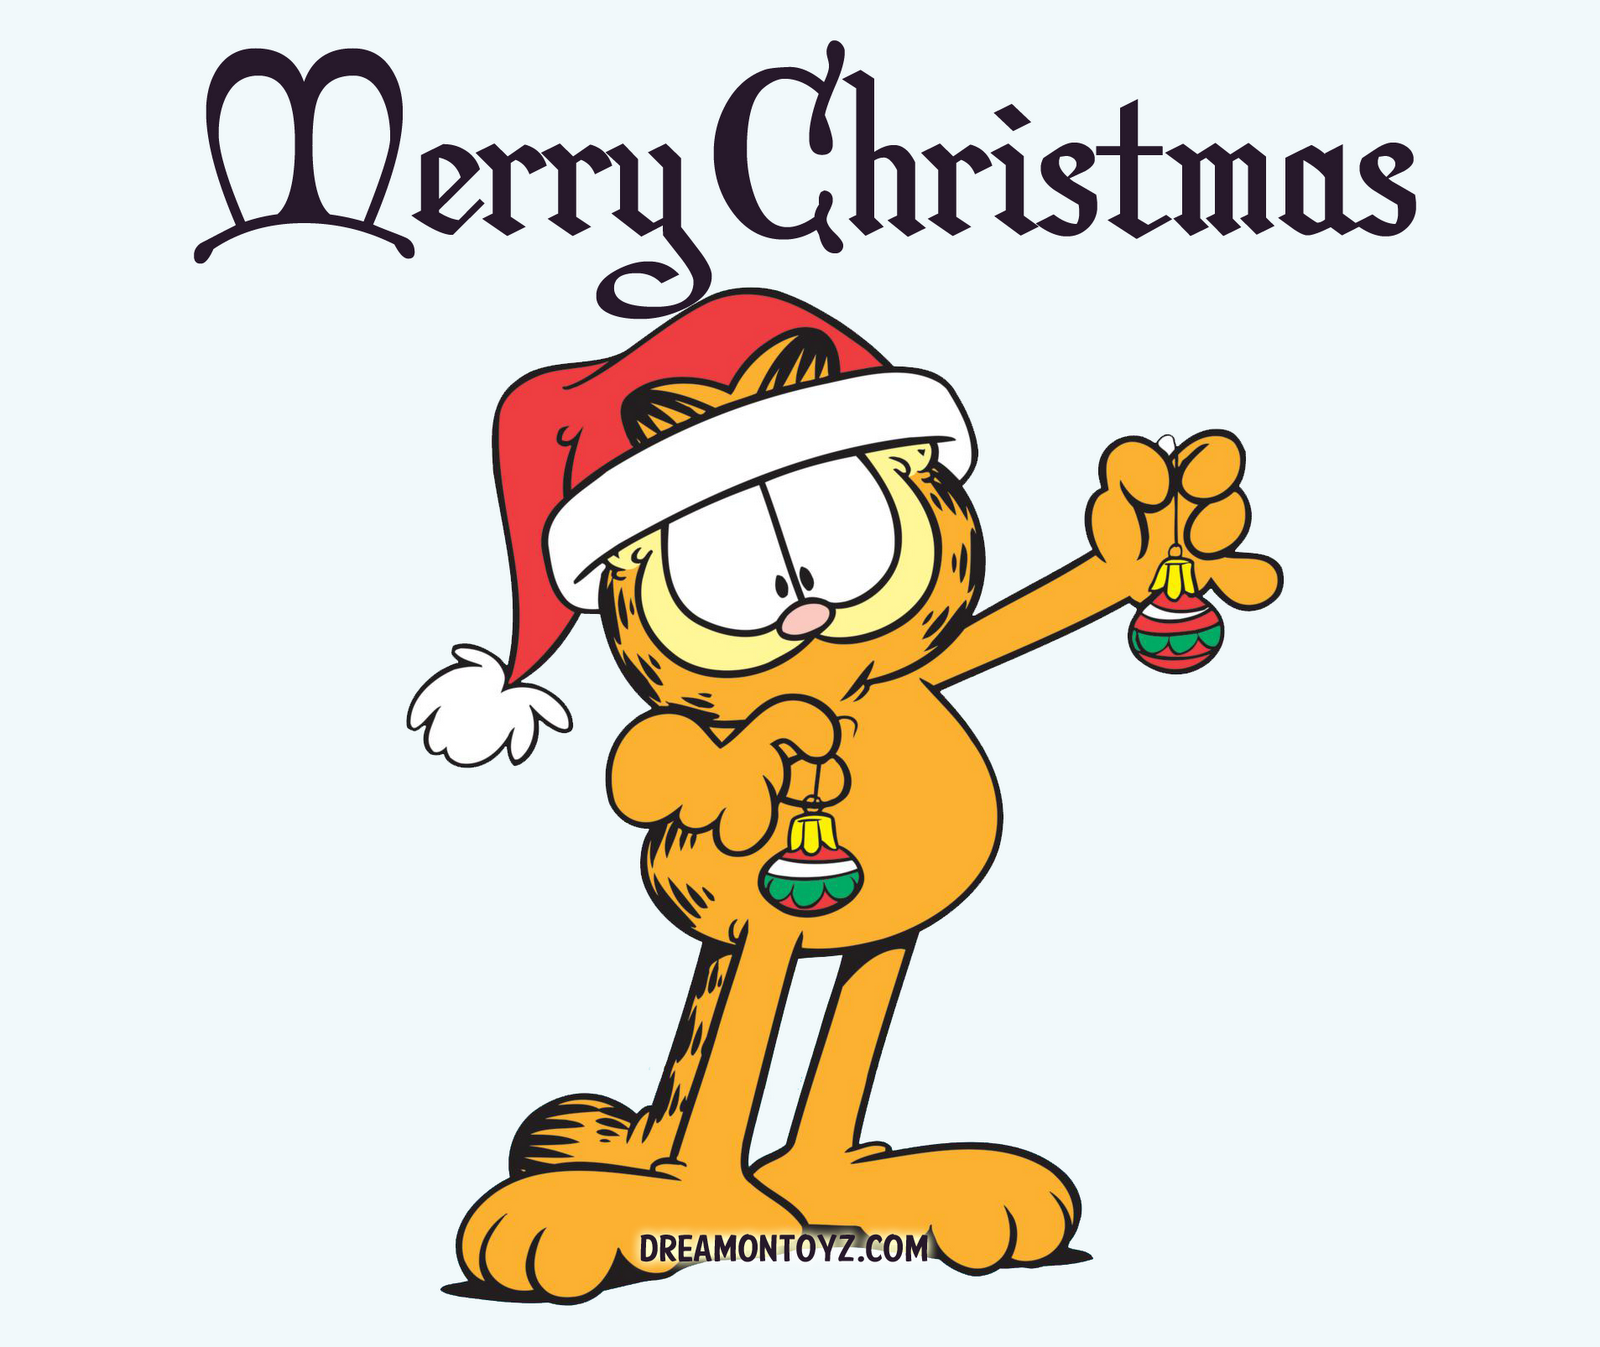 Merry Christmas Cartoon Pictures - Cliparts.co